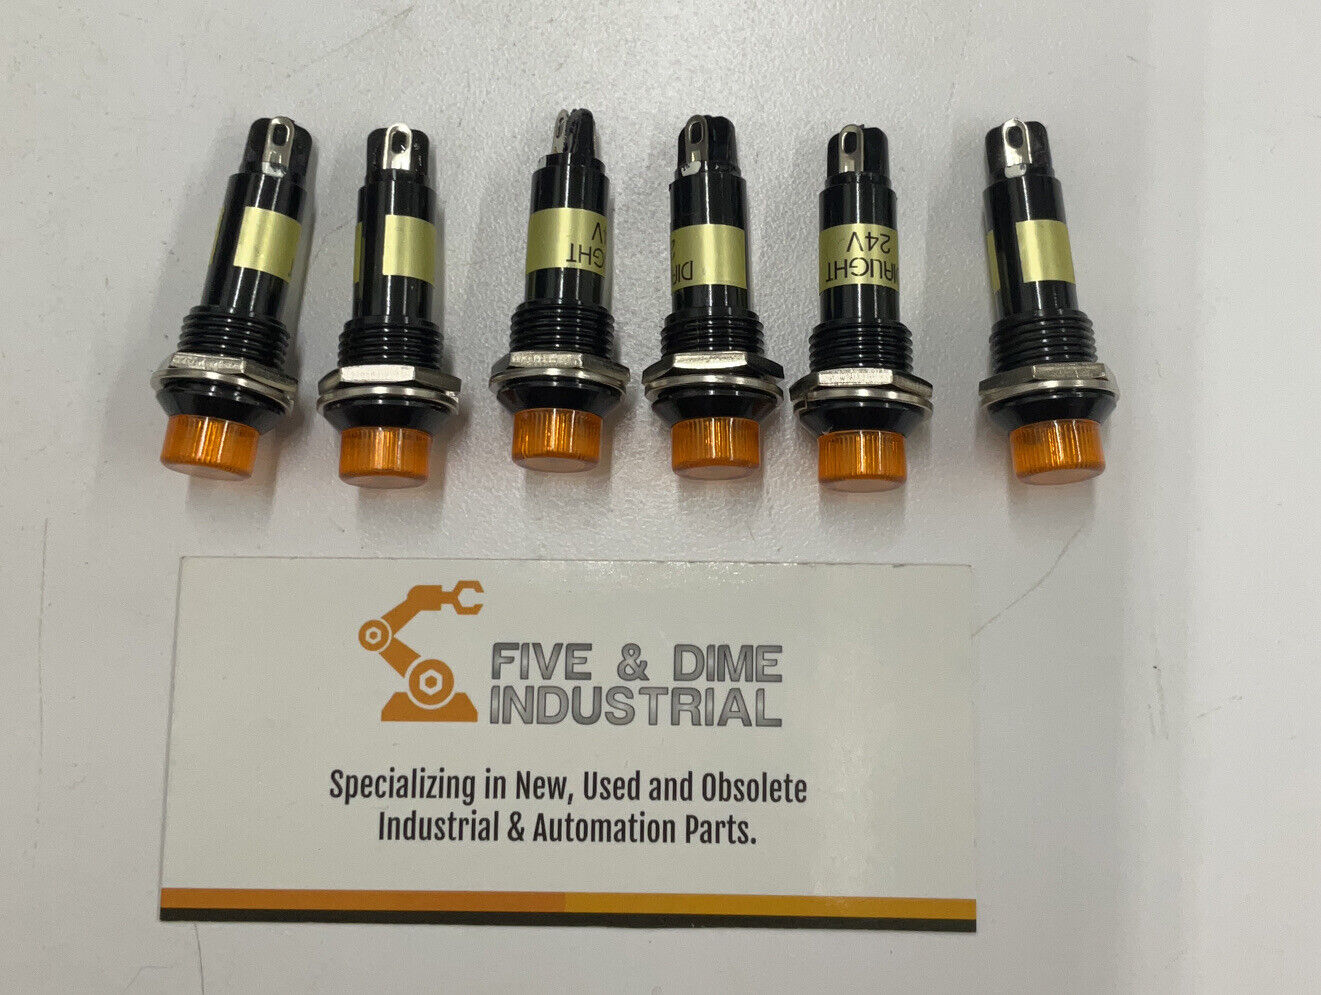 Dialight  Lot of 6 New Led 24VDC Panel Indicator 350-2107-ND  Amber  (RE114)